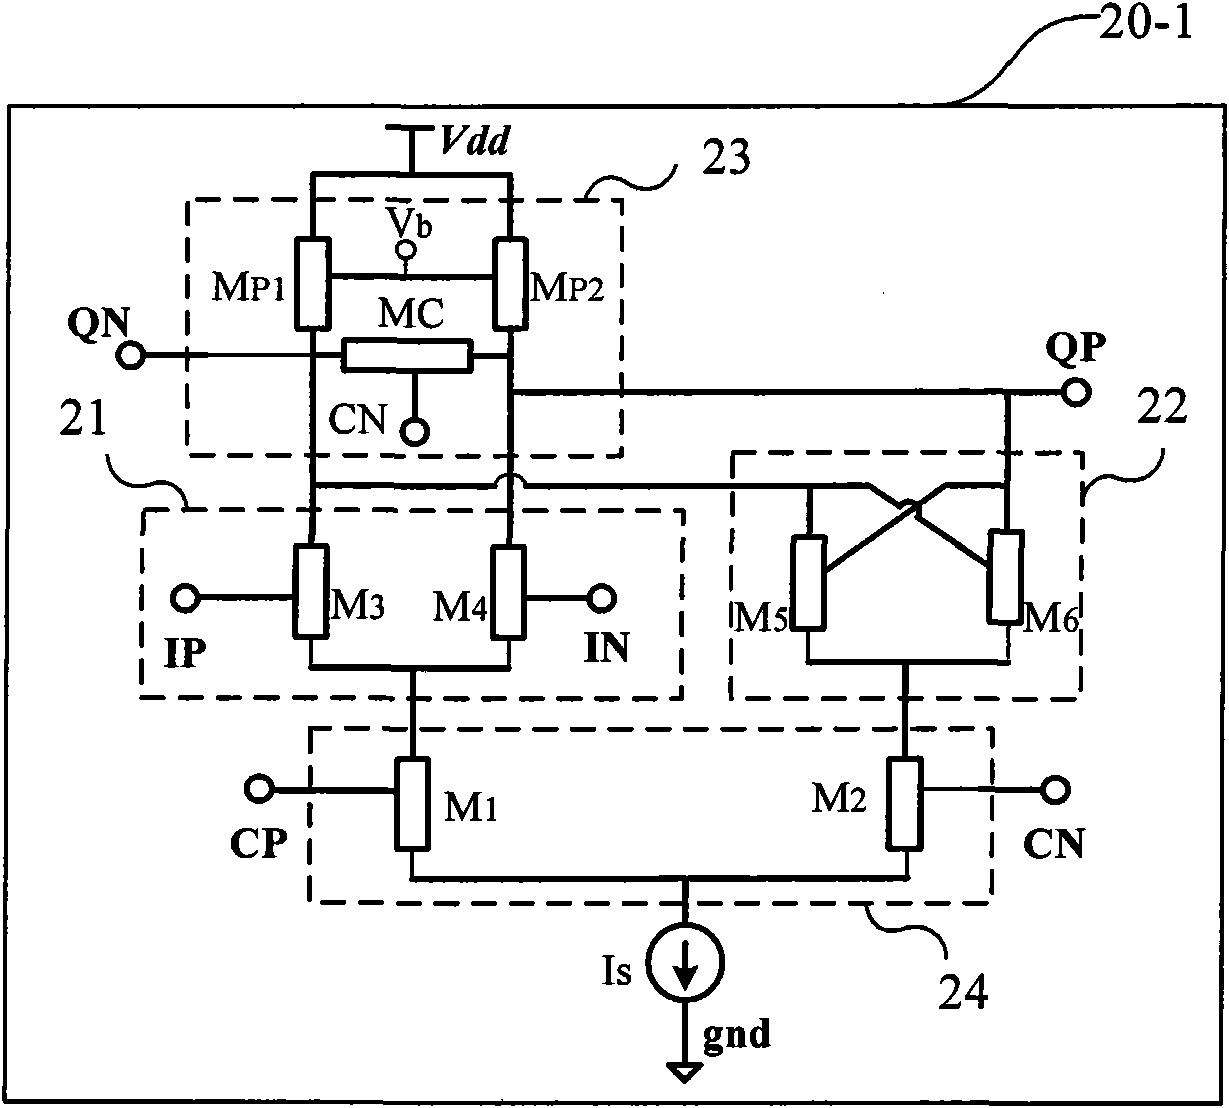 Prescaler with clock-controlled transistor